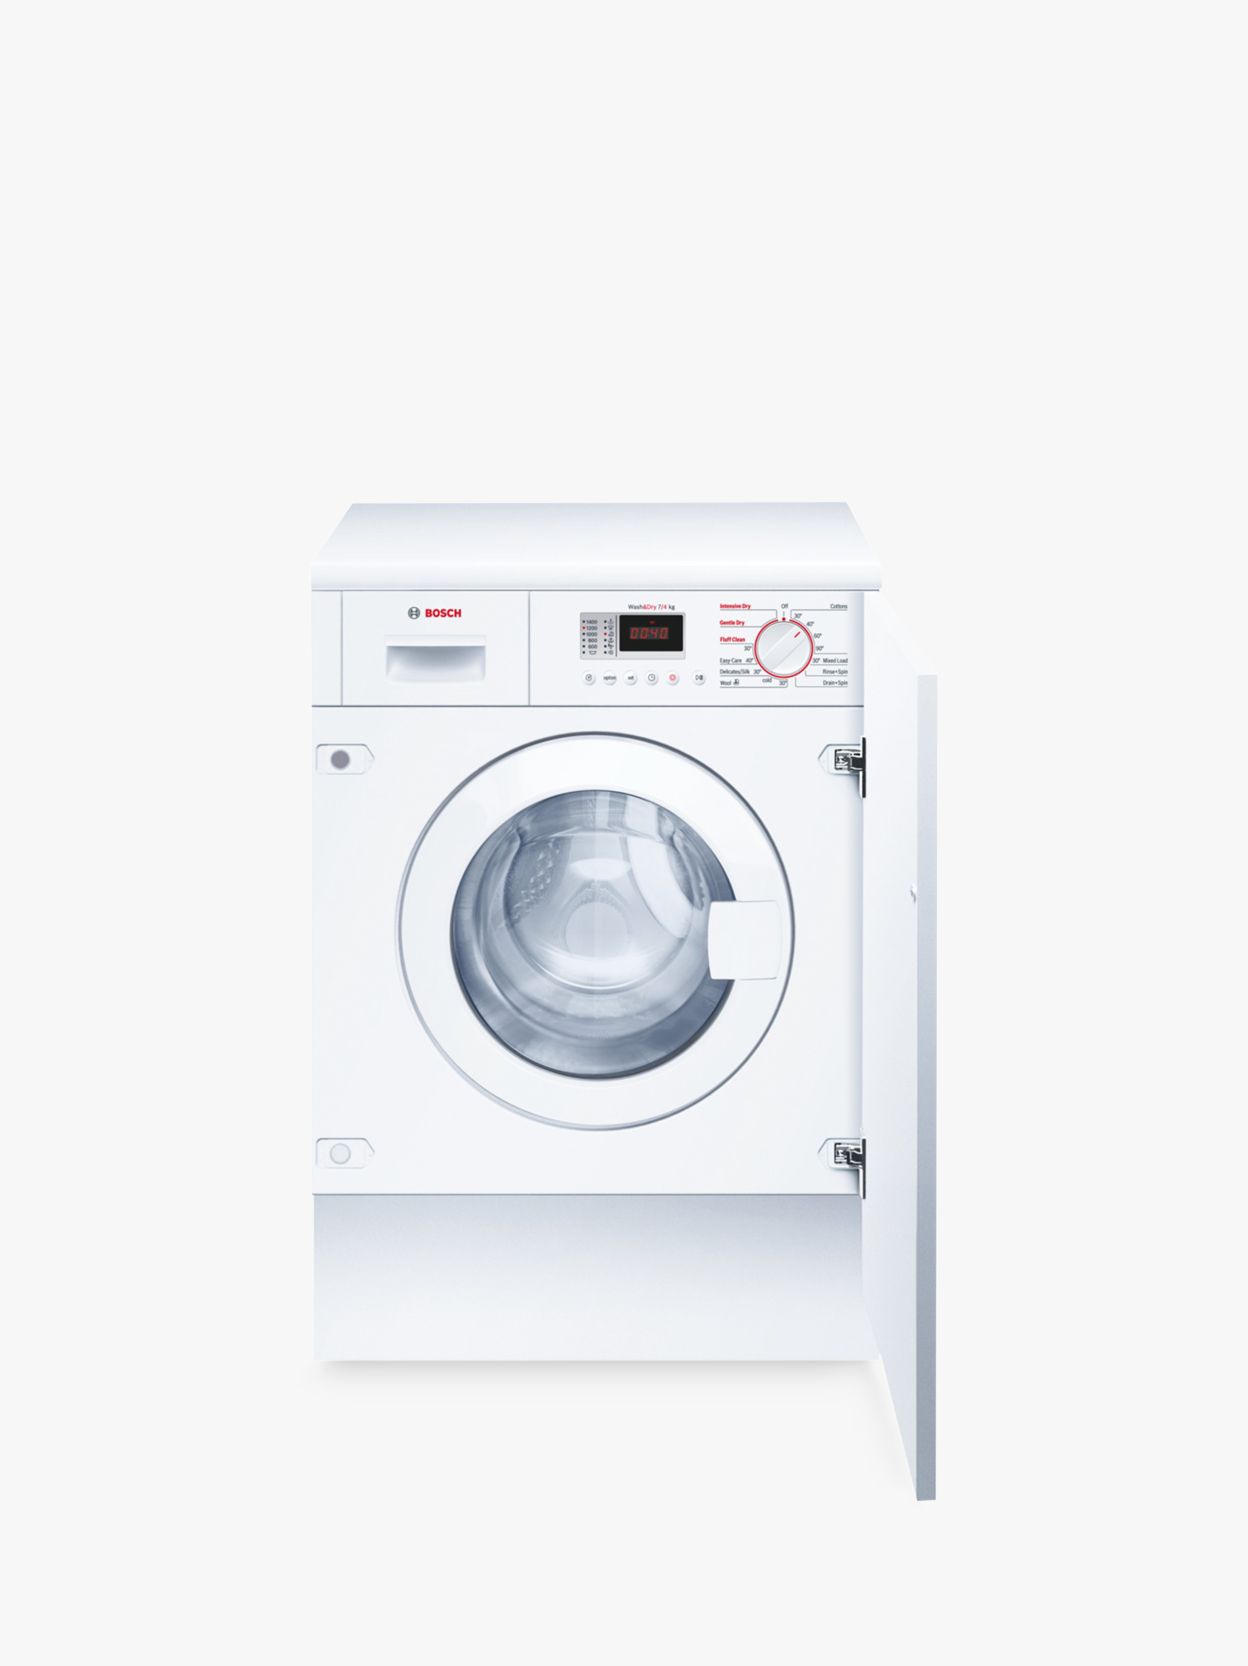 Bosch WKD28351GB Integrated Washer Dryer, 7kg Wash/4kg Dry Load, B Energy Rating, 1400rpm Spin in White